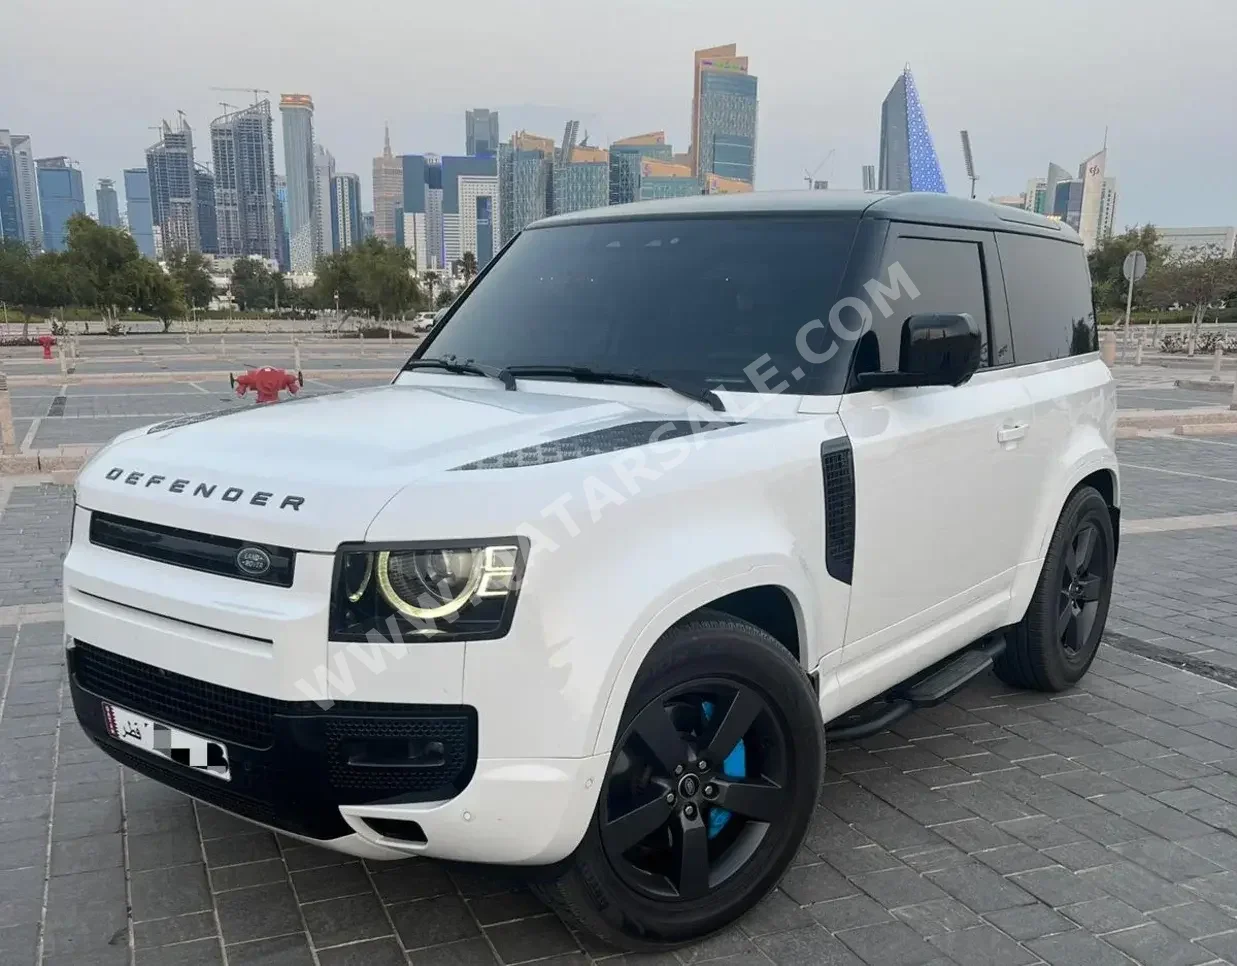 Land Rover  Defender  90  2022  Automatic  29,000 Km  6 Cylinder  Four Wheel Drive (4WD)  SUV  White  With Warranty